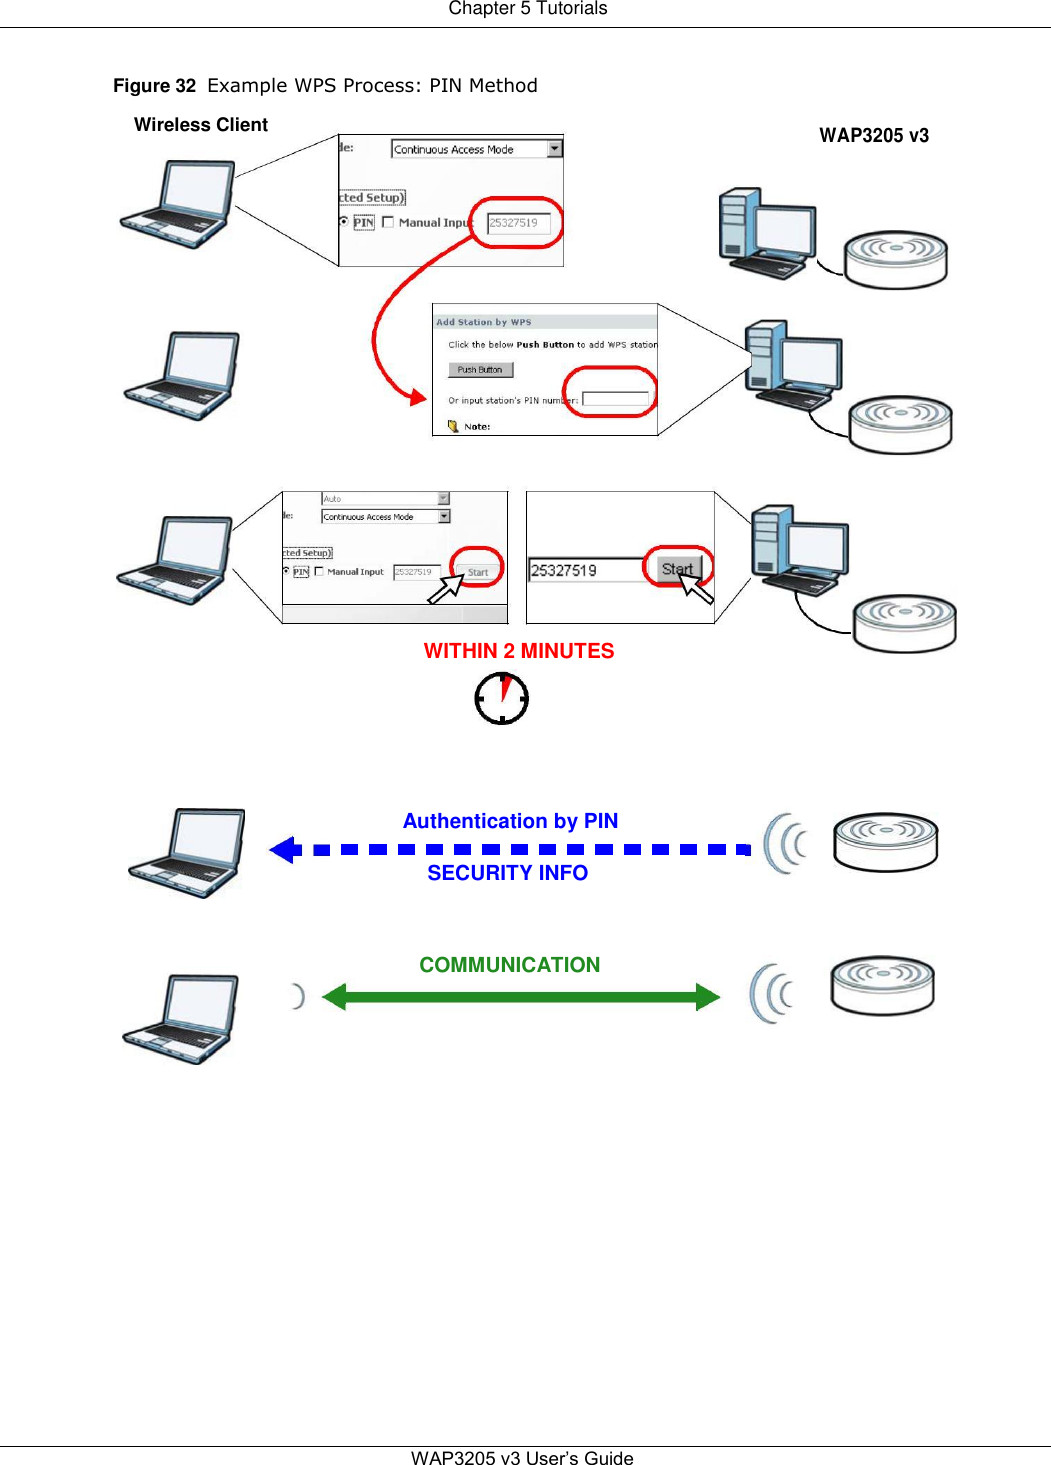 Chapter 5 Tutorials   Figure 32  Example WPS Process: PIN Method   Wireless Client WAP3205 v3                           WITHIN 2 MINUTES        Authentication by PIN  SECURITY INFO    COMMUNICATION                       WAP3205 v3 User’s Guide   